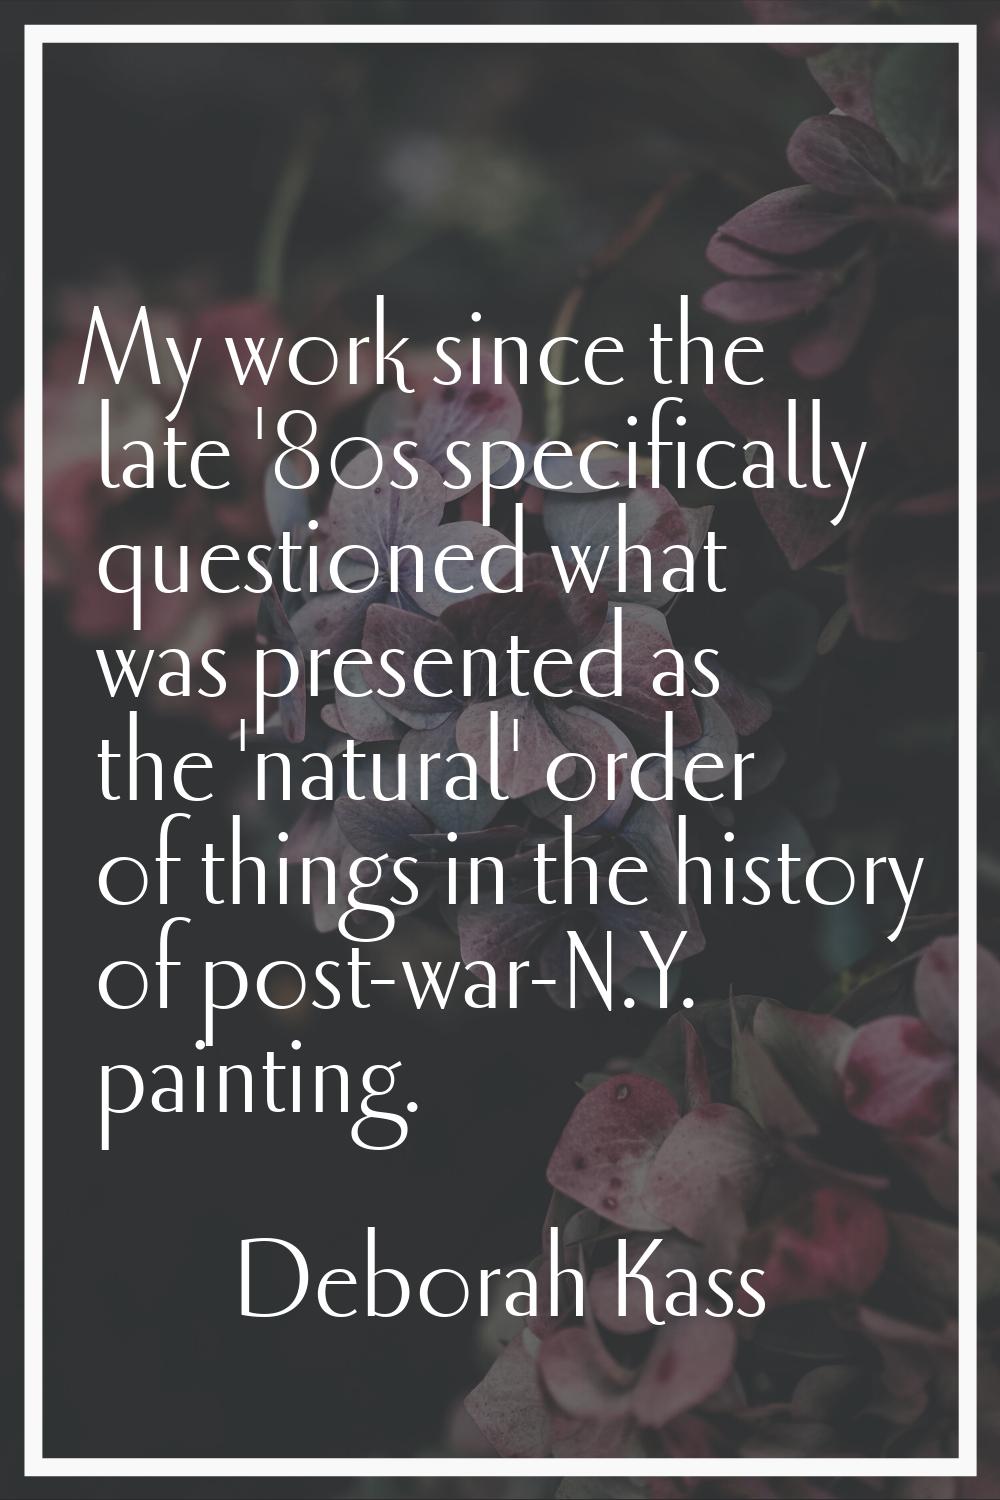 My work since the late '80s specifically questioned what was presented as the 'natural' order of th